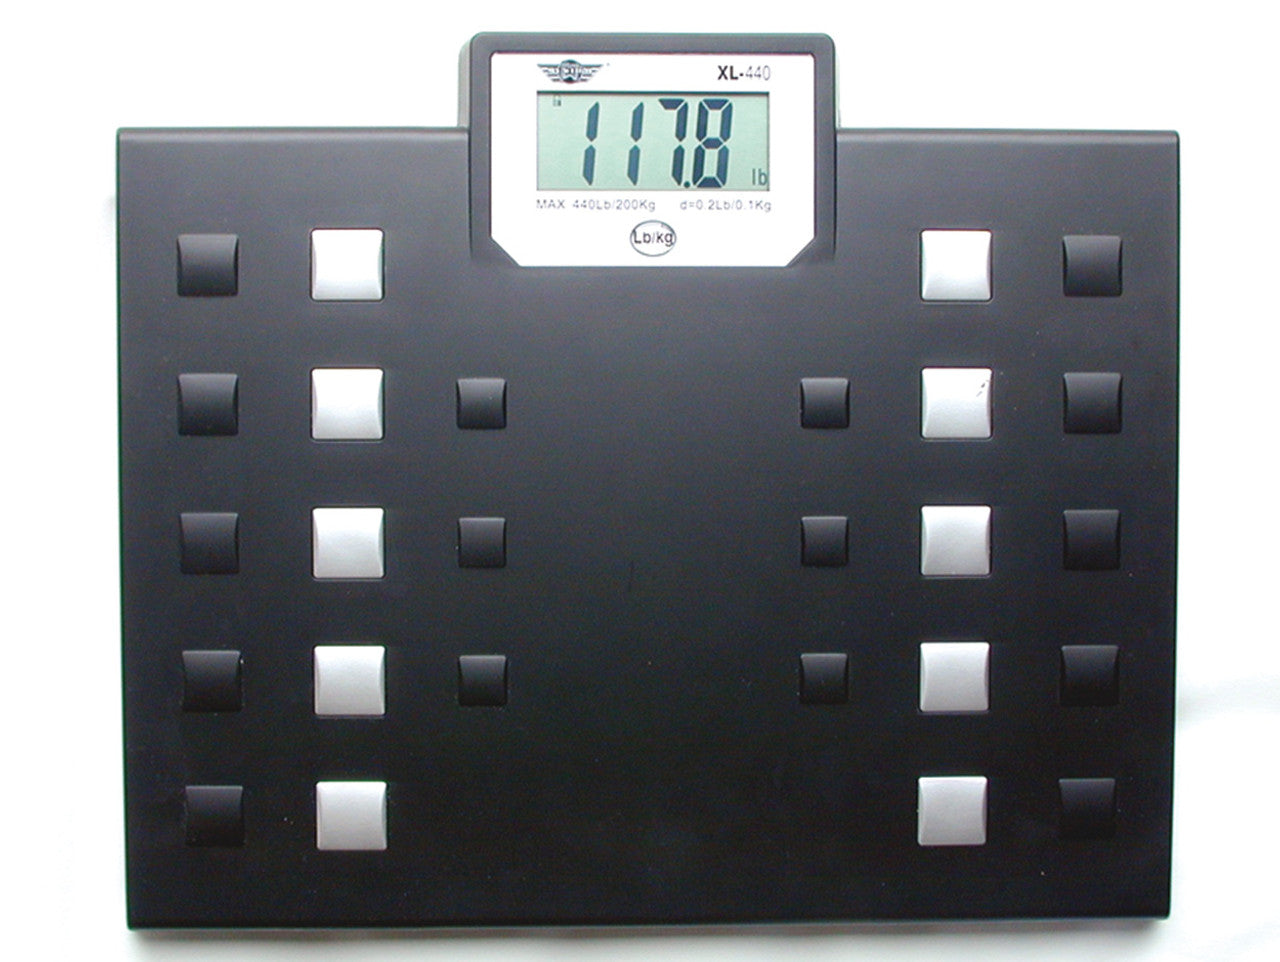 Super Clear Talking Scale 550 with display.